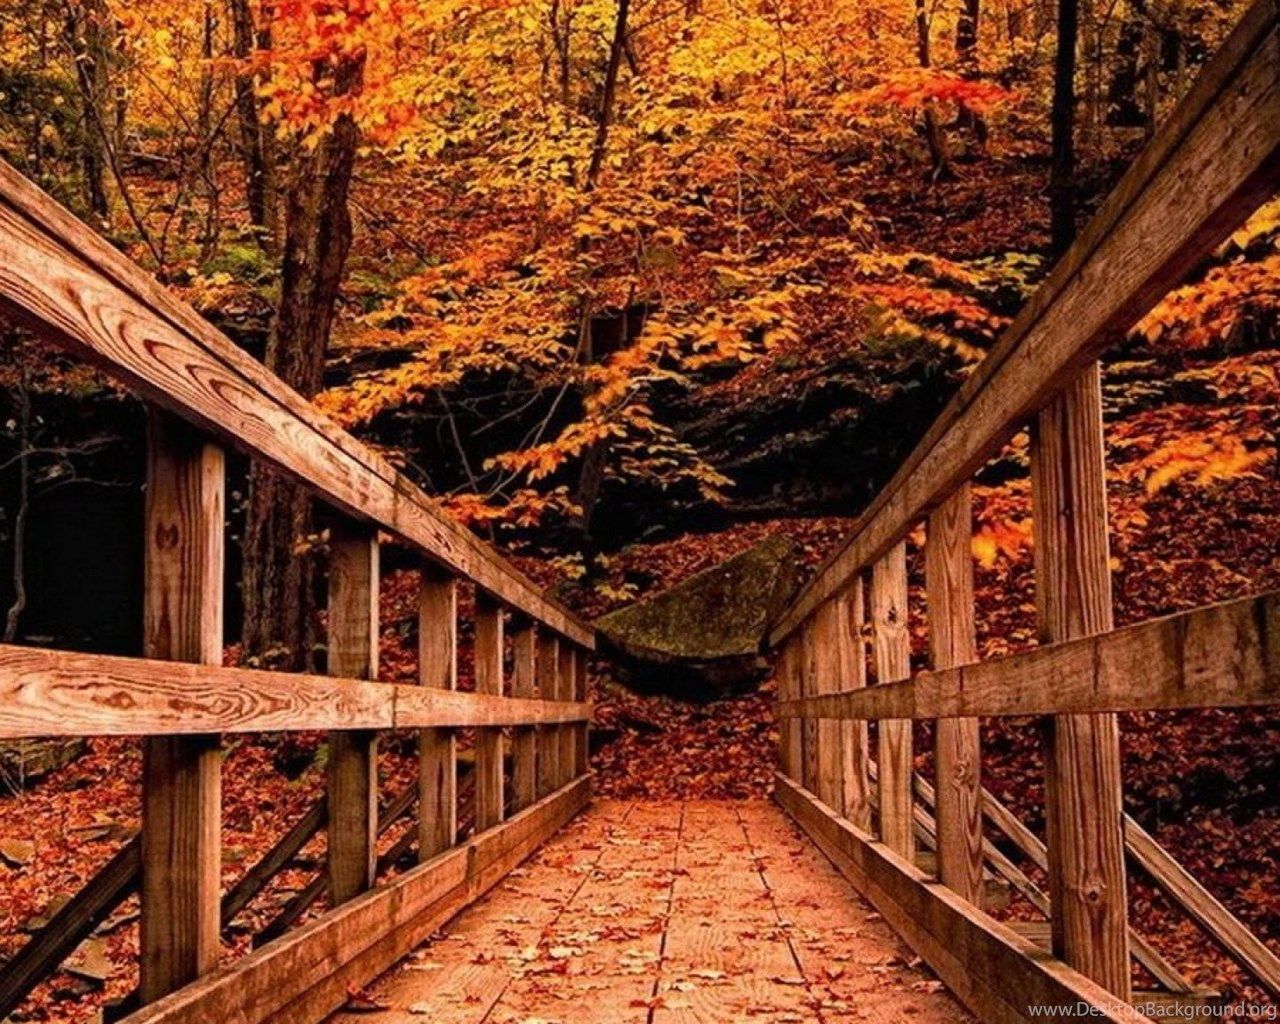 Wood Bridge In Autumn Forest Best HD Wallpaper For iPhone And. Desktop Background